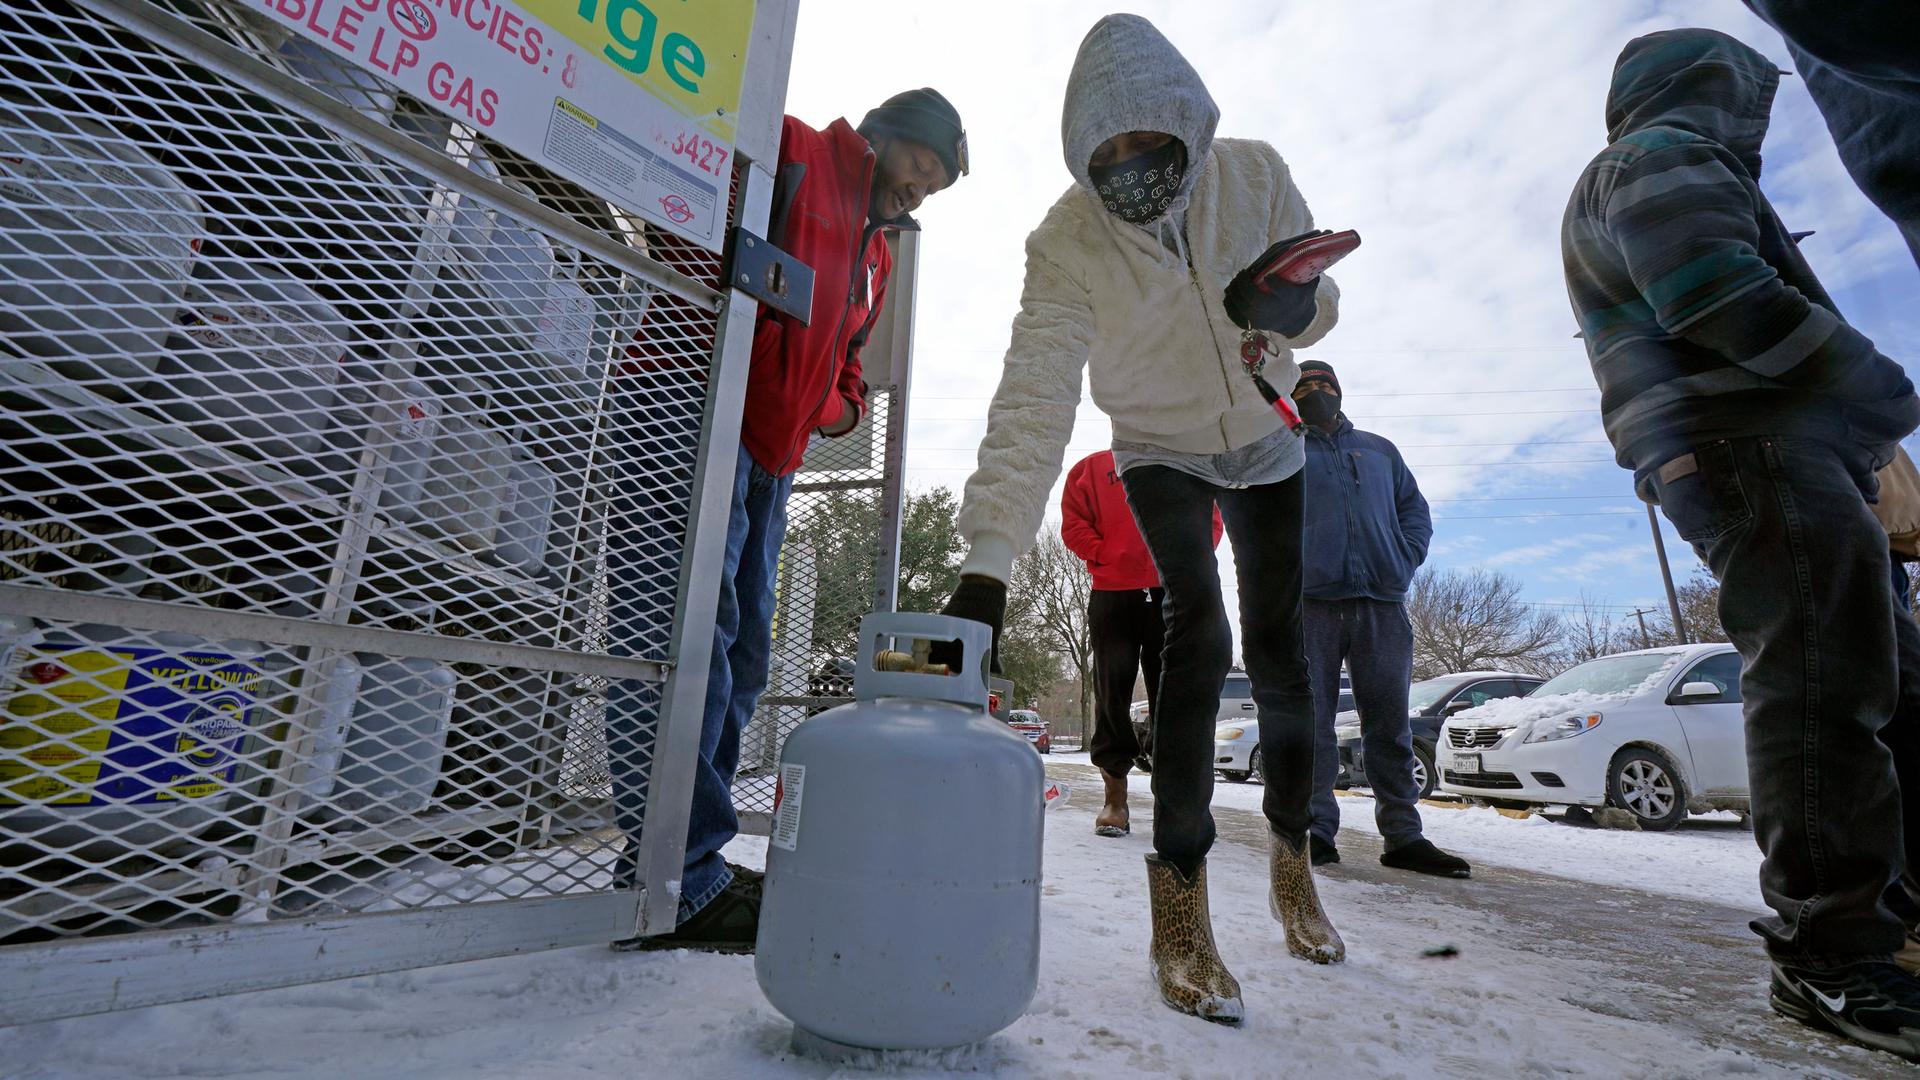 A woman is shown bending over with a white propane tank in her hand and wearing a hooded jacket.